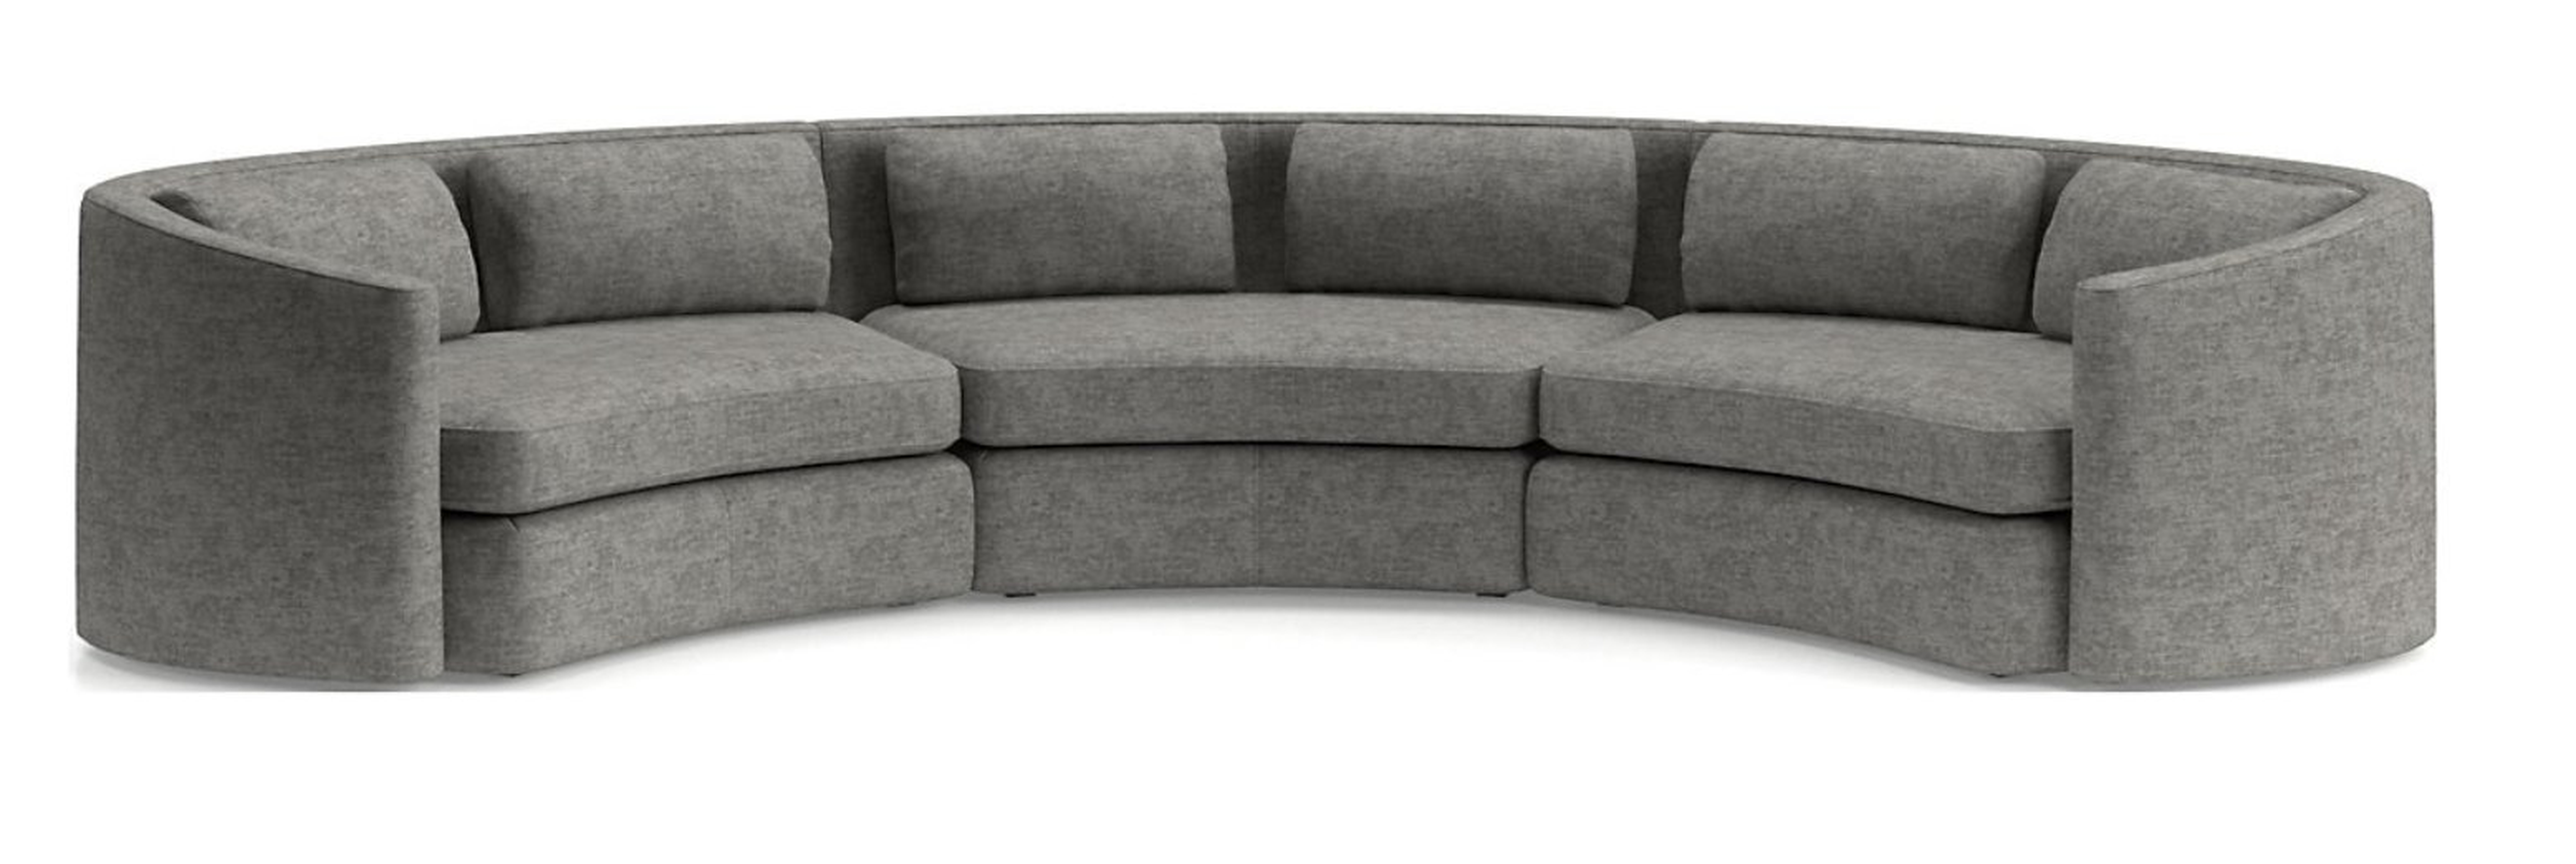 Nouveau 3-Piece Curved Sectional Sofa - Crate and Barrel